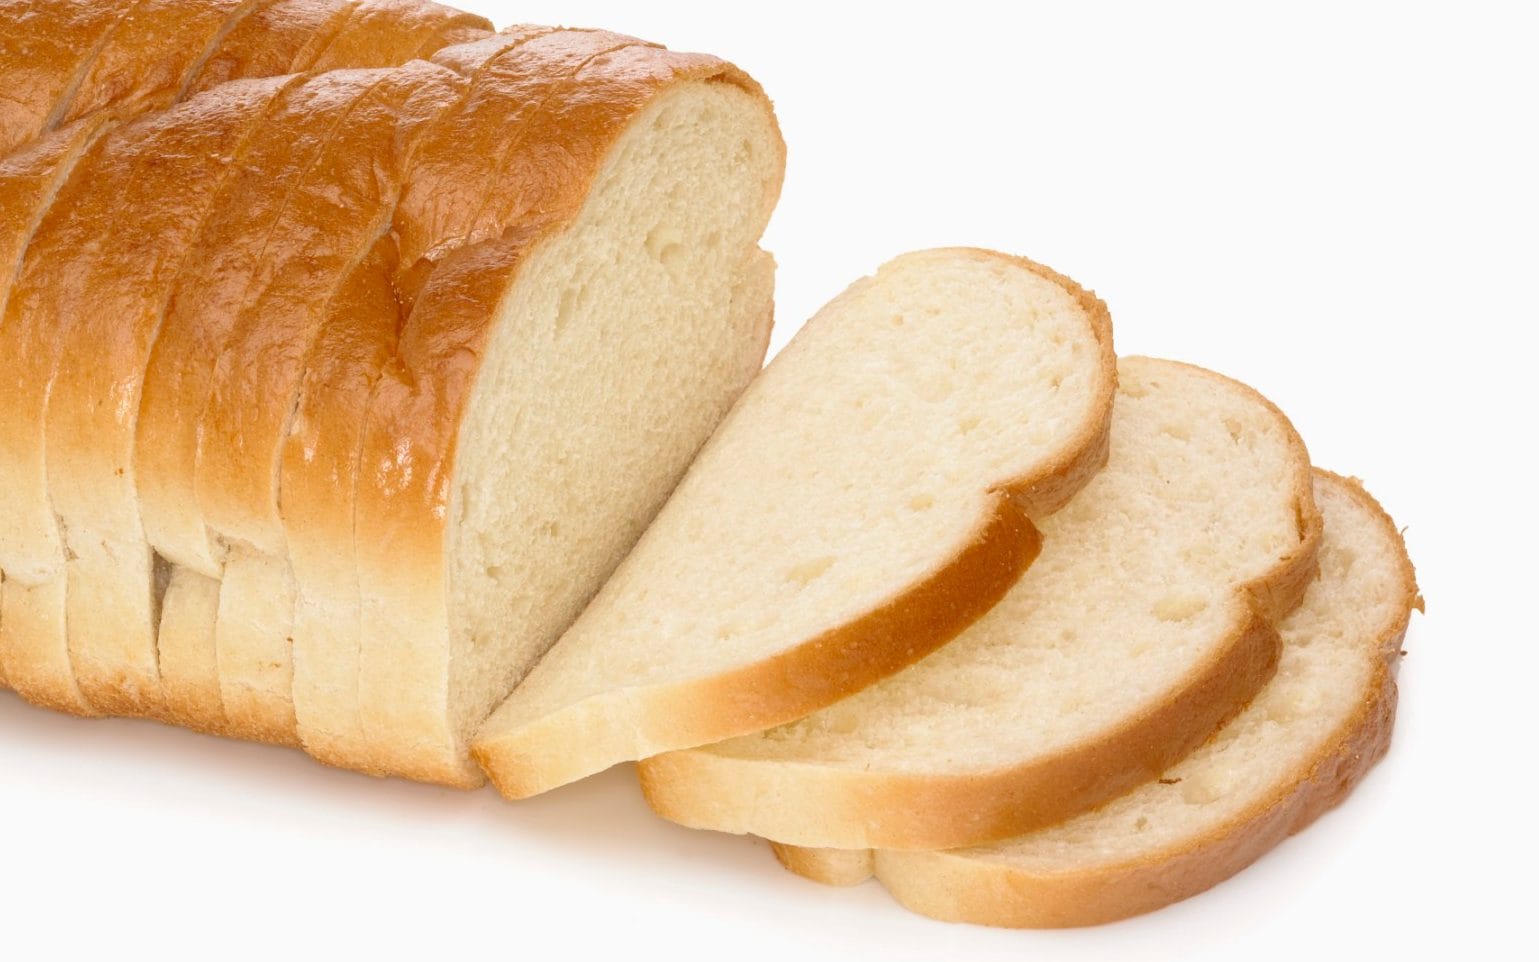 soft white bread is a con – no matter what the boffins do to it